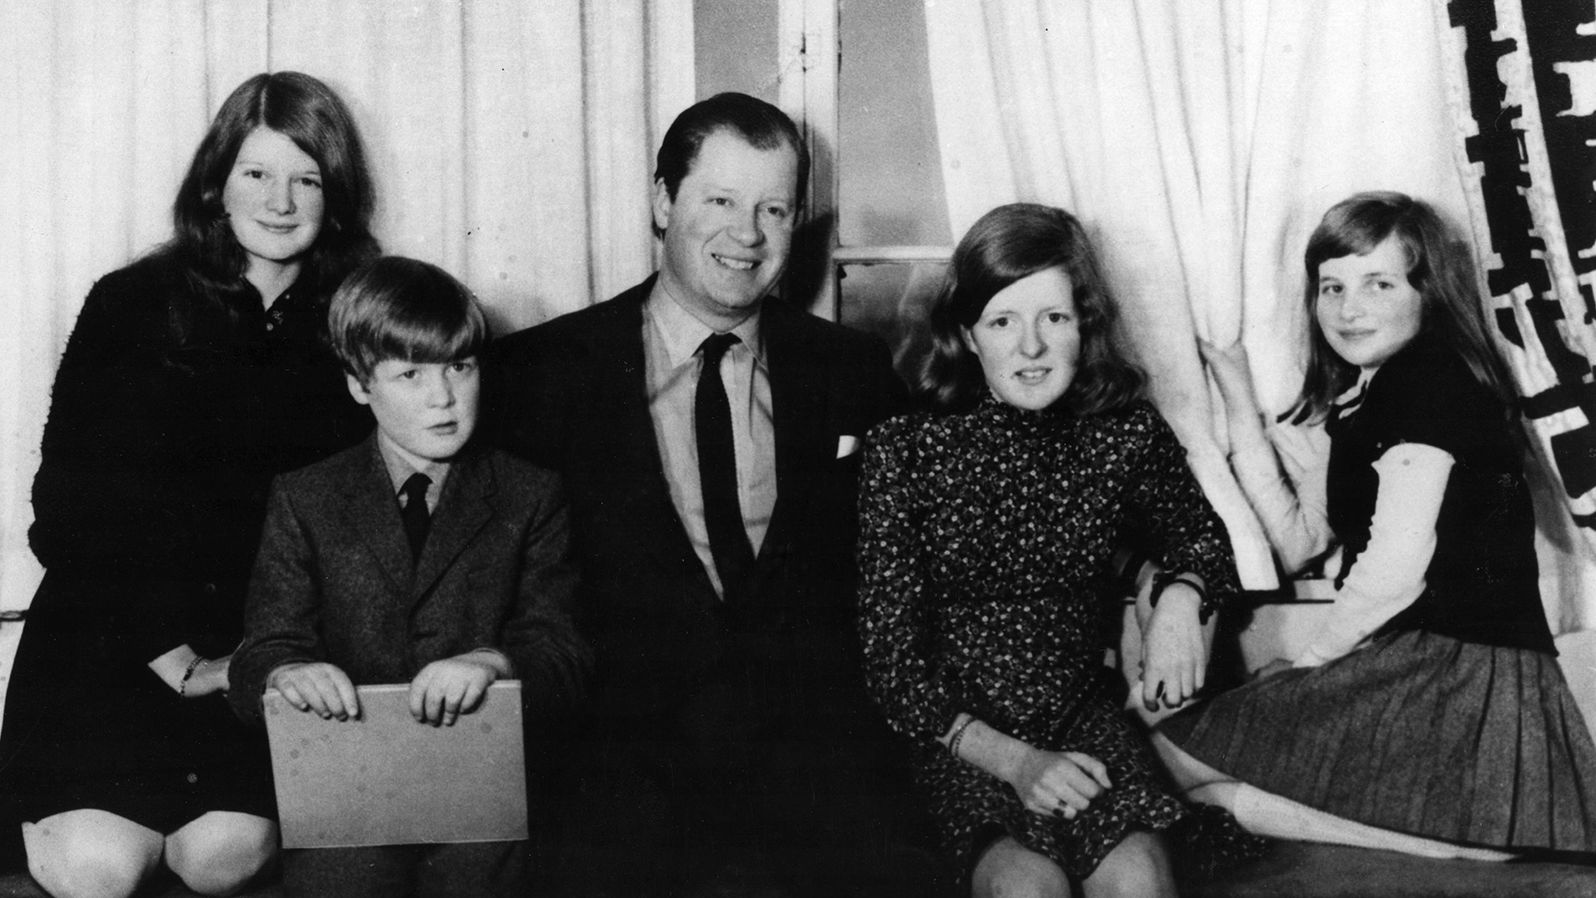 Diana, far right, is photographed with her father, John, and her three siblings circa 1970. Sarah is on the far left and Jane is next to Diana. When Diana was 7 years old, her parents divorced and her father was given custody of the children.